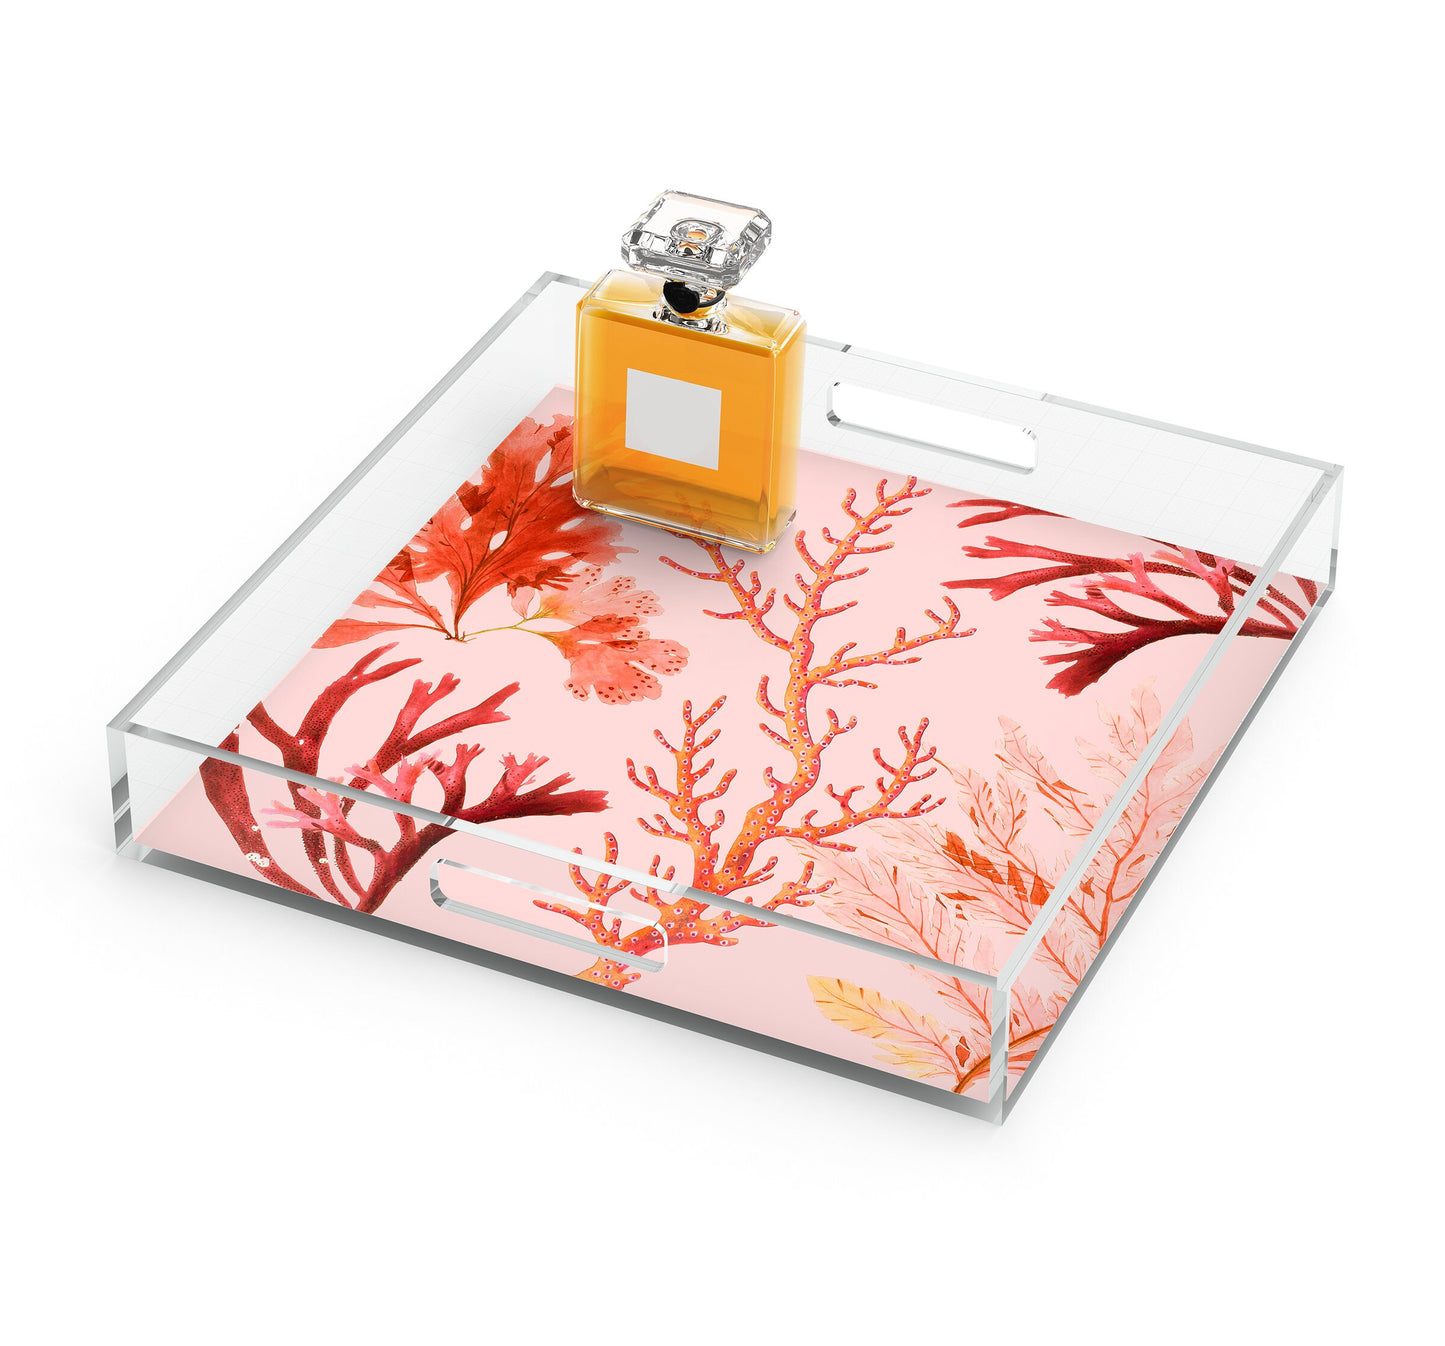 Coral Reef Acrylic Tray, 12"x12", Pale Pink